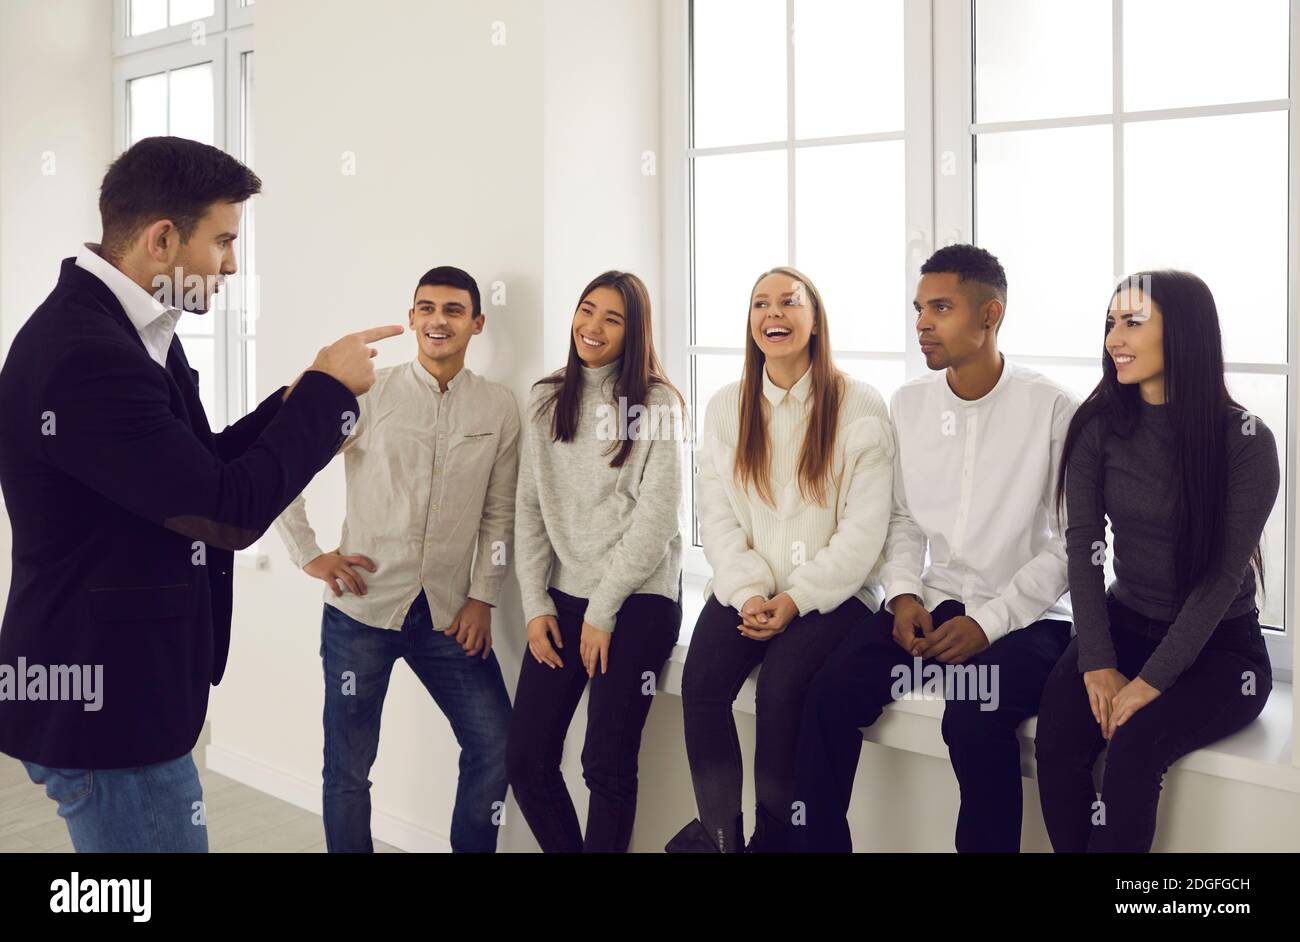 Office workers listen to their colleague who tells an interesting story during a break at work. Stock Photo